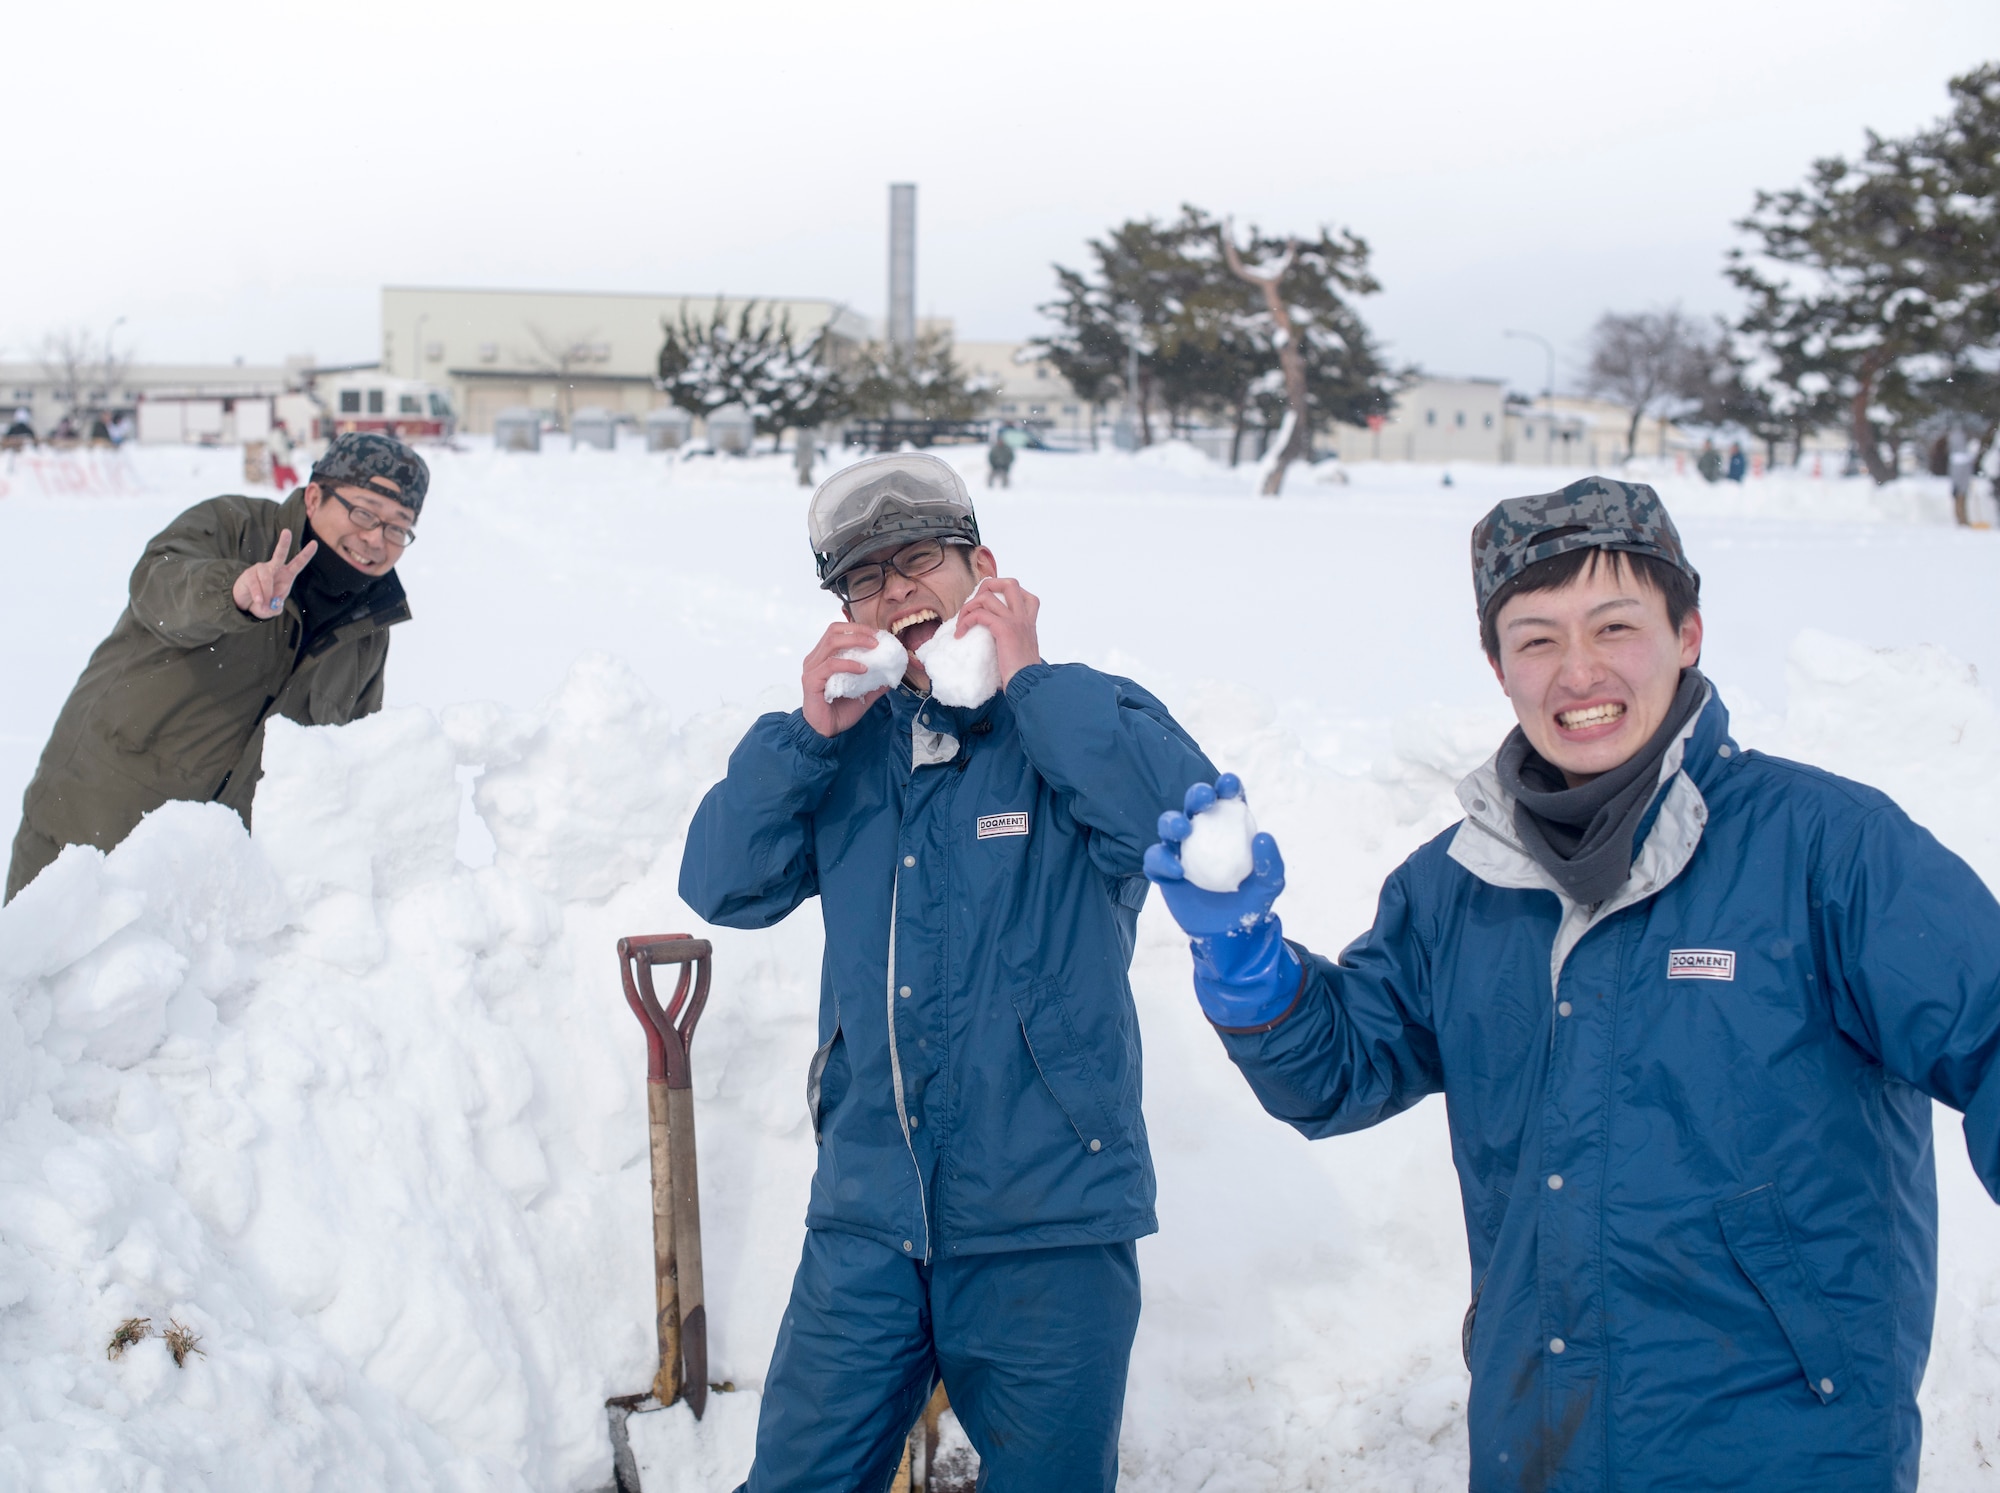 Members with the Japan Air Self-Defense Force pause for a photo during the inaugural “Snowblast” event at Misawa Air Base, Japan, Feb. 14, 2019. The JASDF were the first to show up to the event and build their fortress. They participated in the snowball fight and tied with the explosive ordnance disposal and infrastructure flights during the capture the flag event. The afternoon afforded them an opportunity for members to boost morale and build international relationships. (U.S. Air Force photo by 1st Lt. Jeremy Garcia)